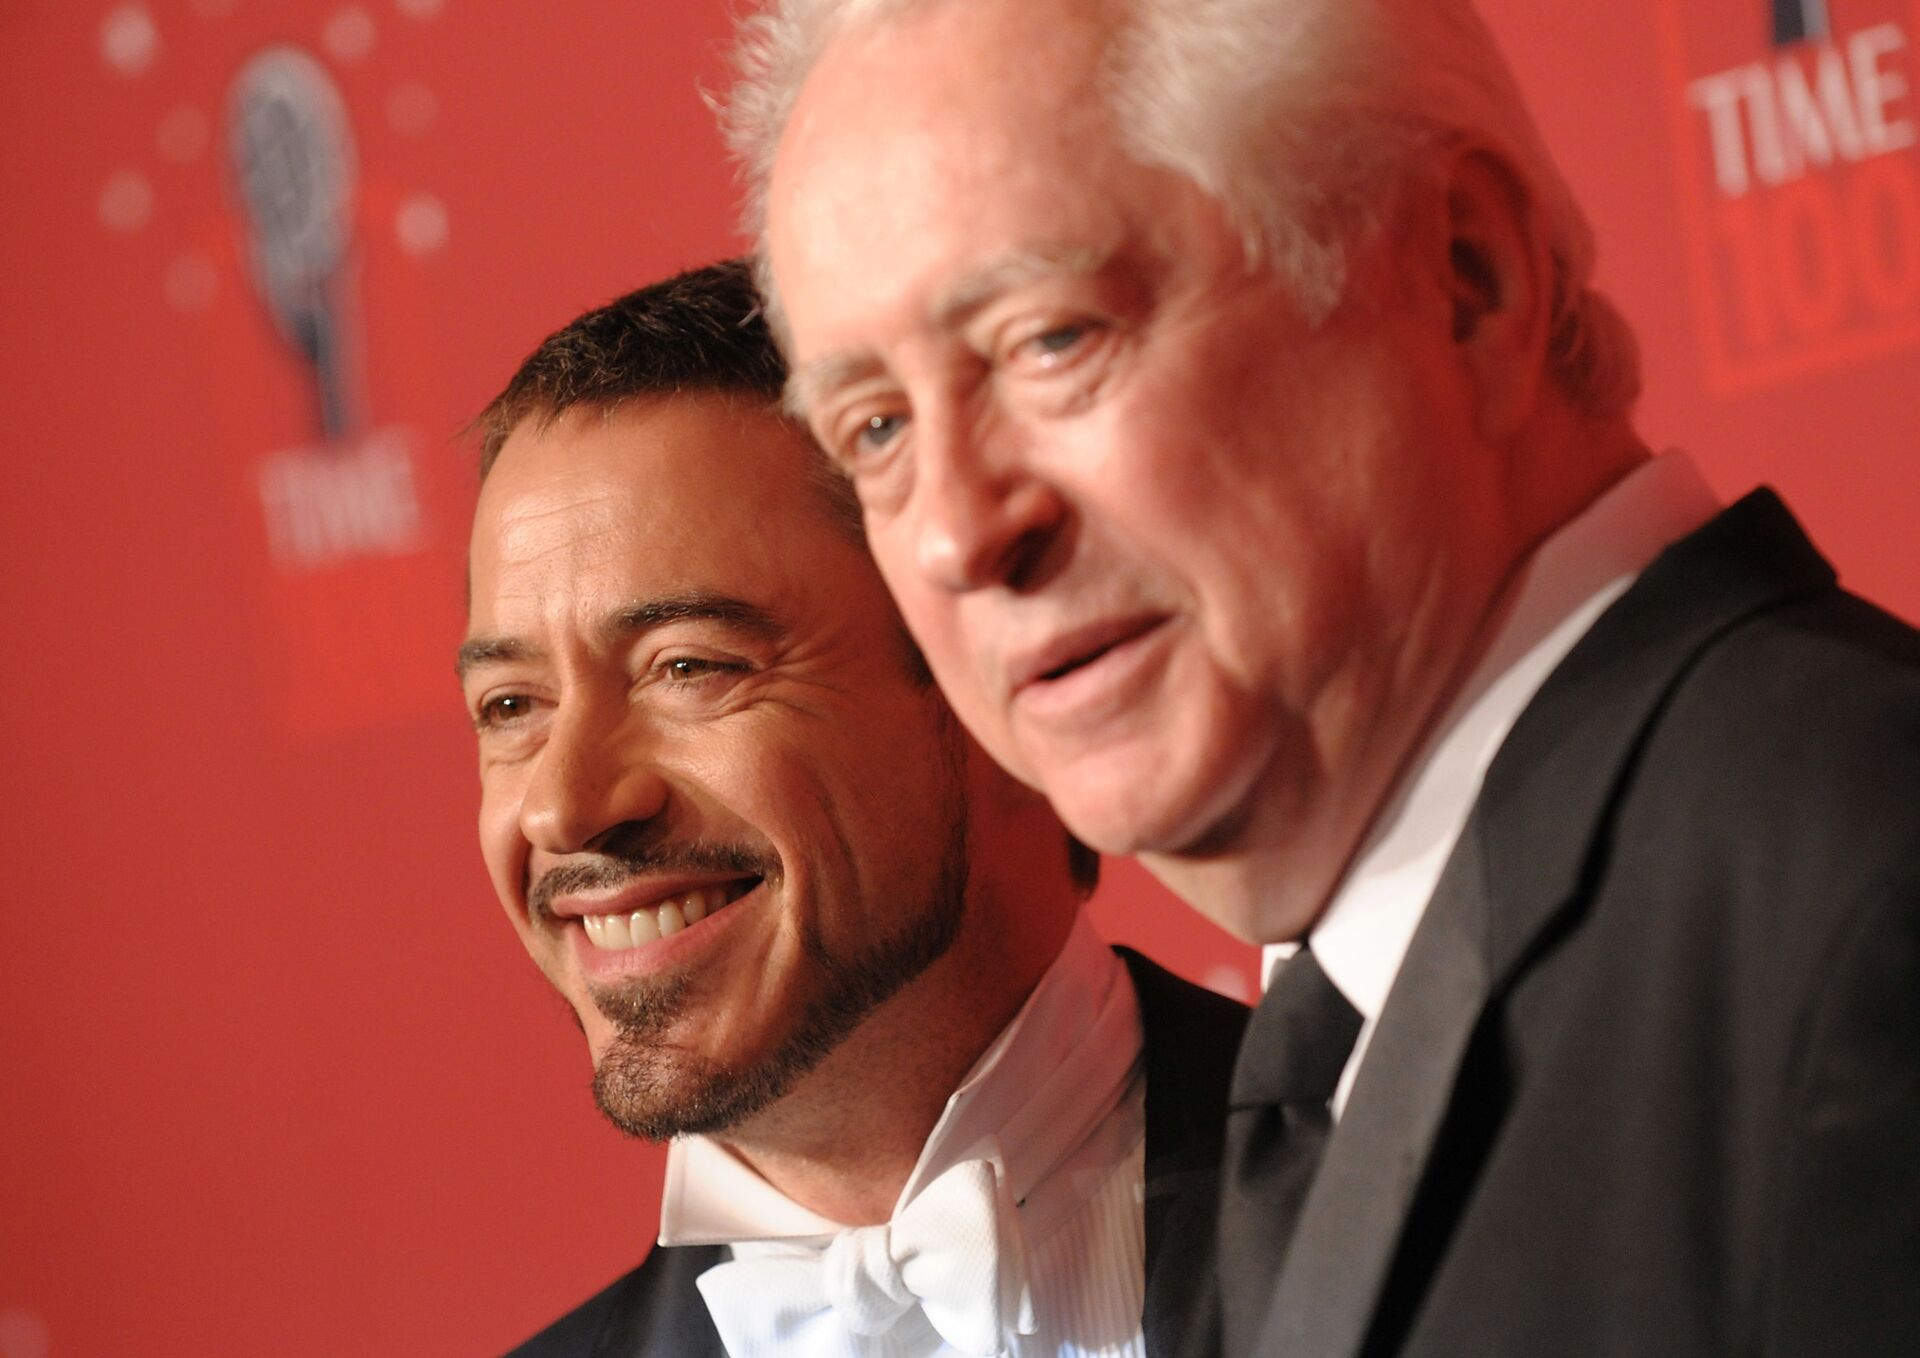 Actor Robert Downey Jr., left, and his father Robert Downey Sr. arrive at Time's 100 Most Influential People in the World Gala on Thursday, May 8, 2008 in New York. - Sputnik International, 1920, 07.09.2021